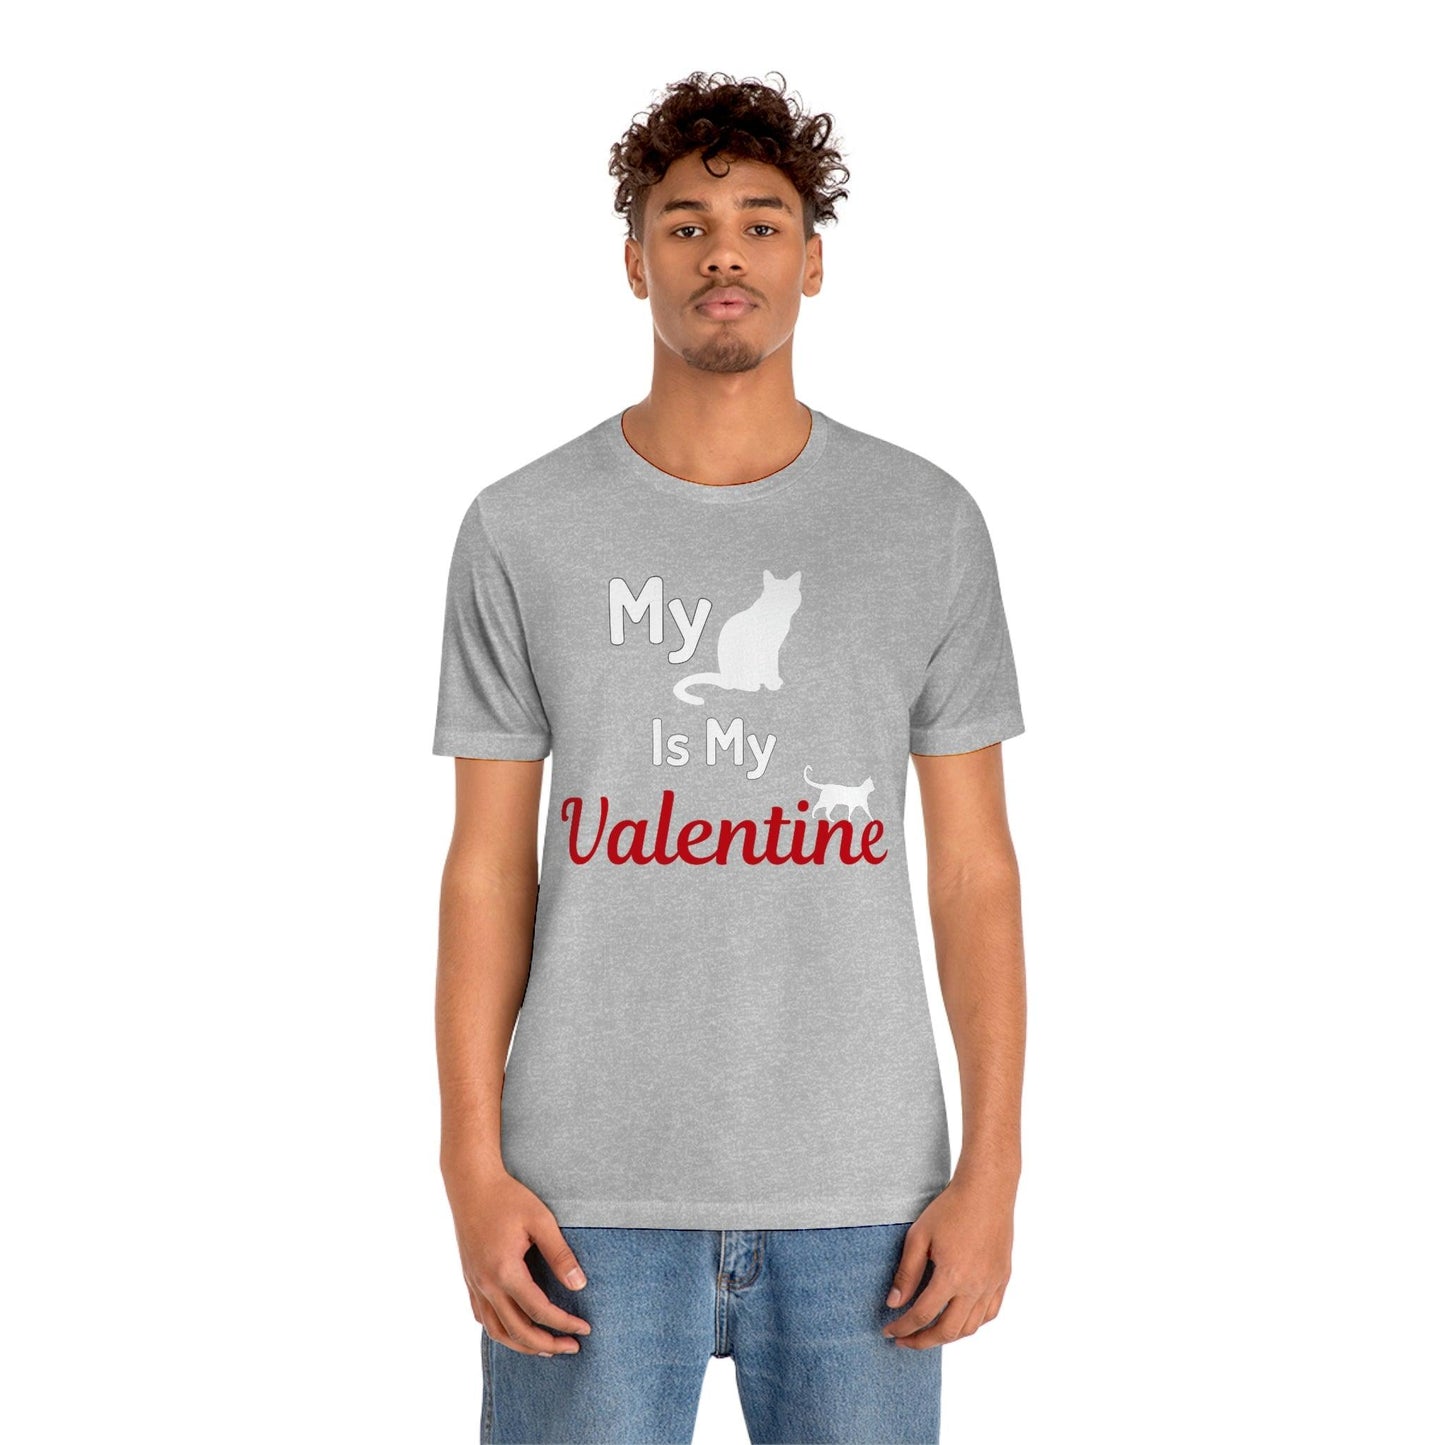 My Cat is My Valentine, Pet lover Valentine shirt - Cute cat lover shirt - gift for cat lovers